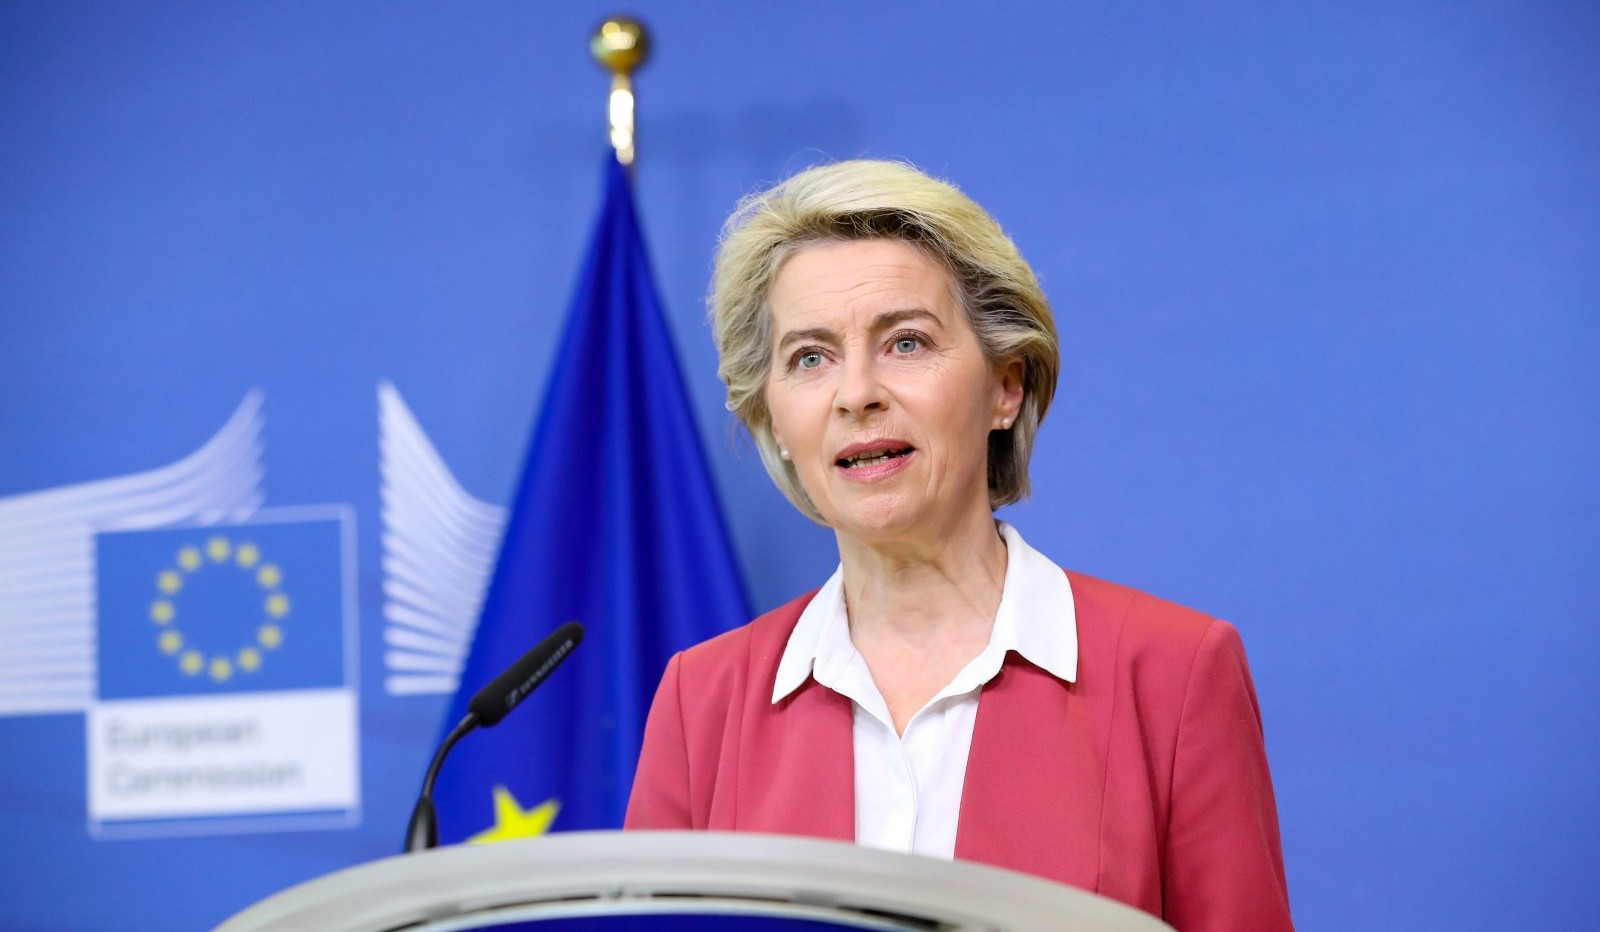 Moscow has partially or completely stopped gas supply to 12 EU countries: Von der Leyen